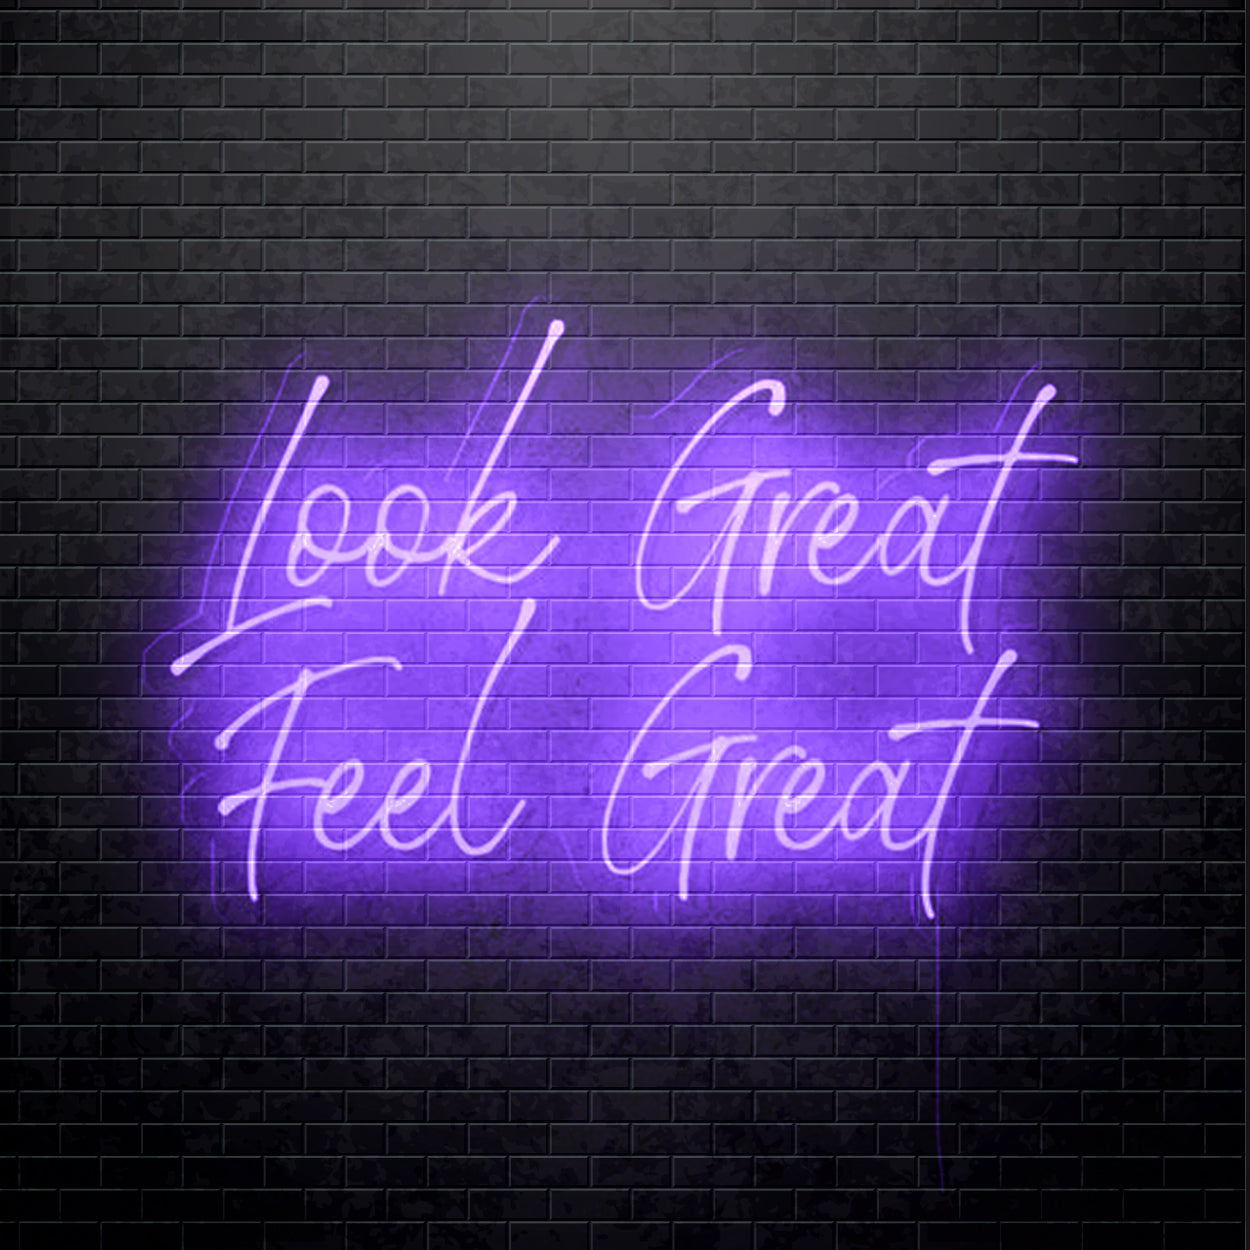 LED Neon sign - Look Great Feel Great